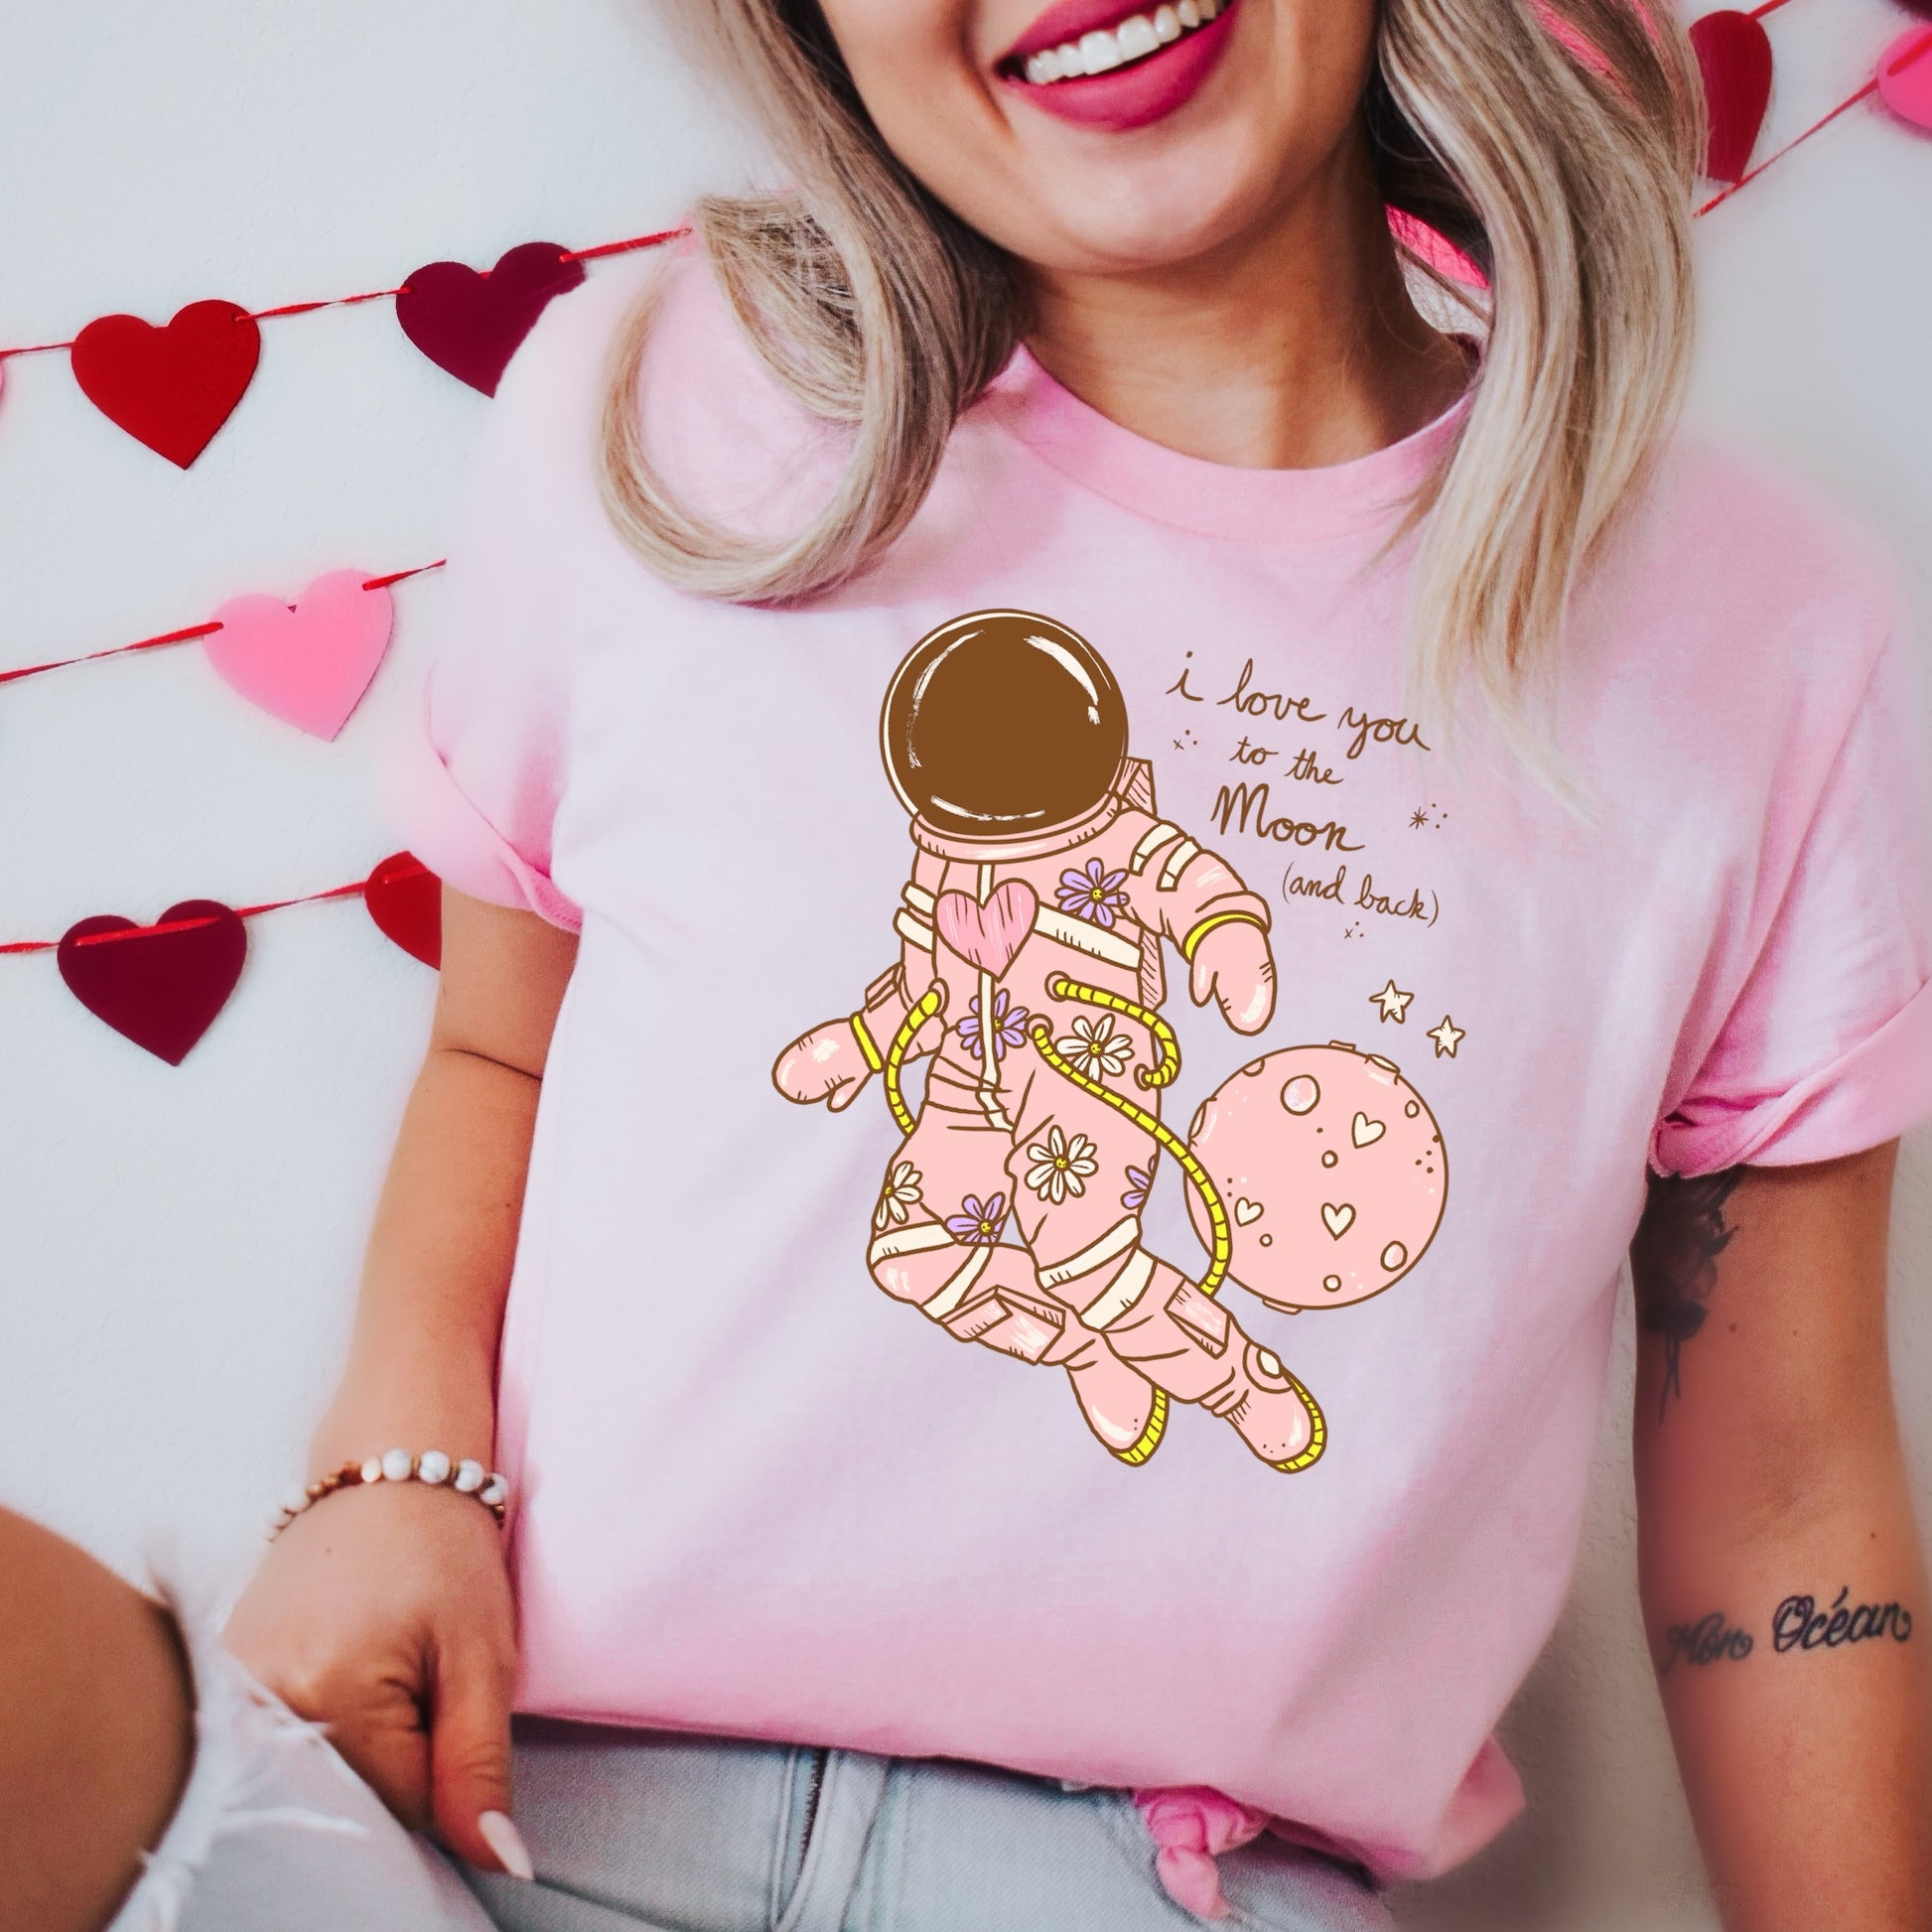 Pink Astronaut Valentine's Day Iron on Transfer on Pink Shirt - Words Read "I Love you to the Moon and Back" - Sublimation Iron on - DTF Iron on